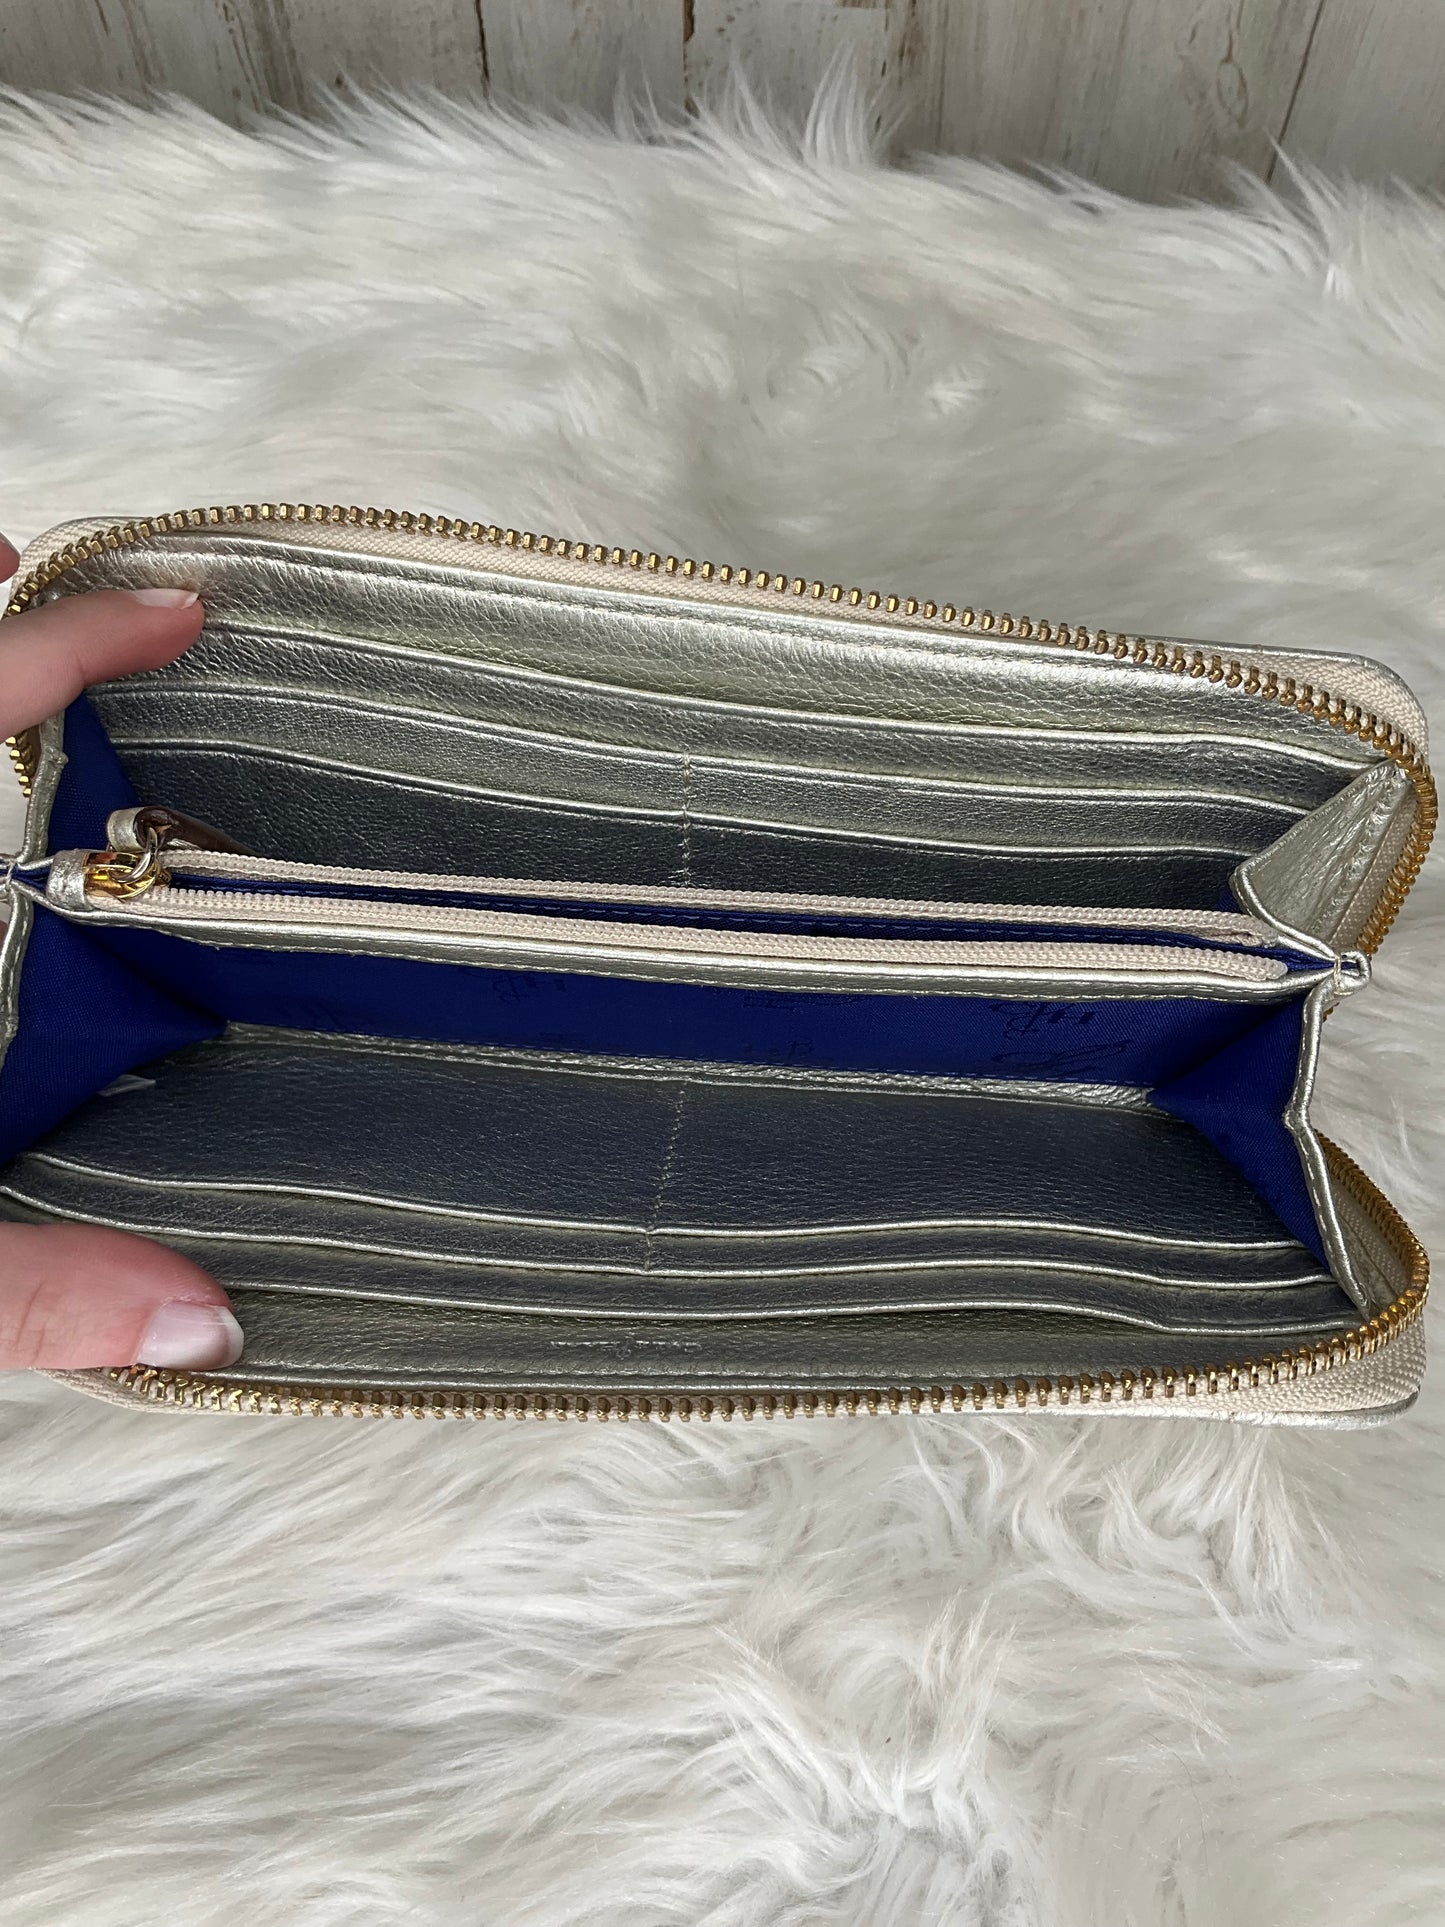 Wallet Designer By Cole-haan  Size: Large